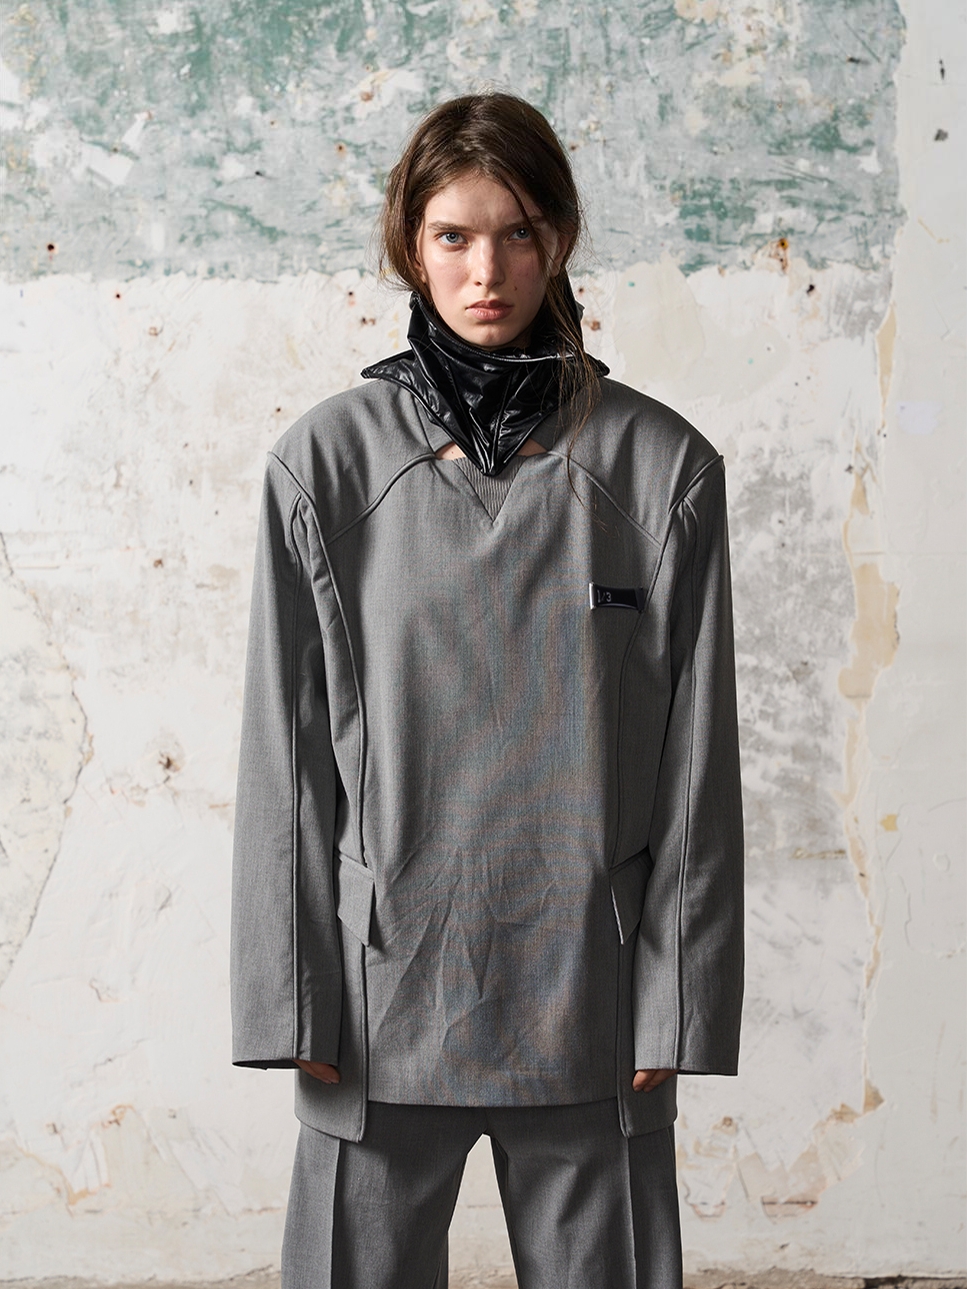 1/3BLIND 22AW DECONSTRUCTED SUIT JACKET